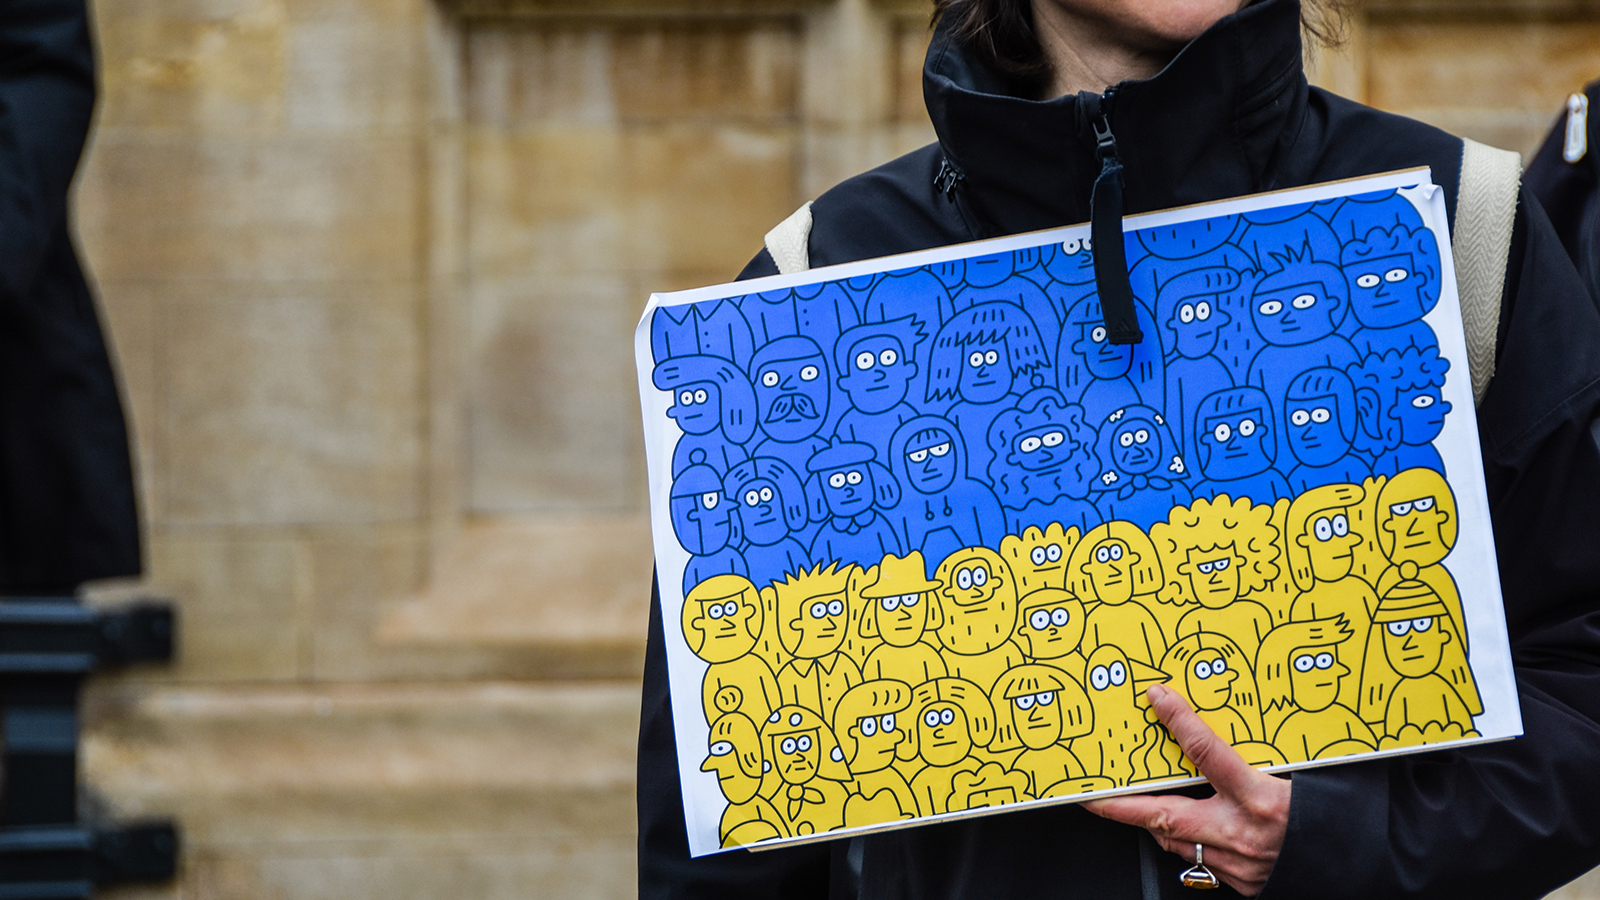 A person is holding a sign in blue and yellow, reminiscent of the Ukrainian flag.